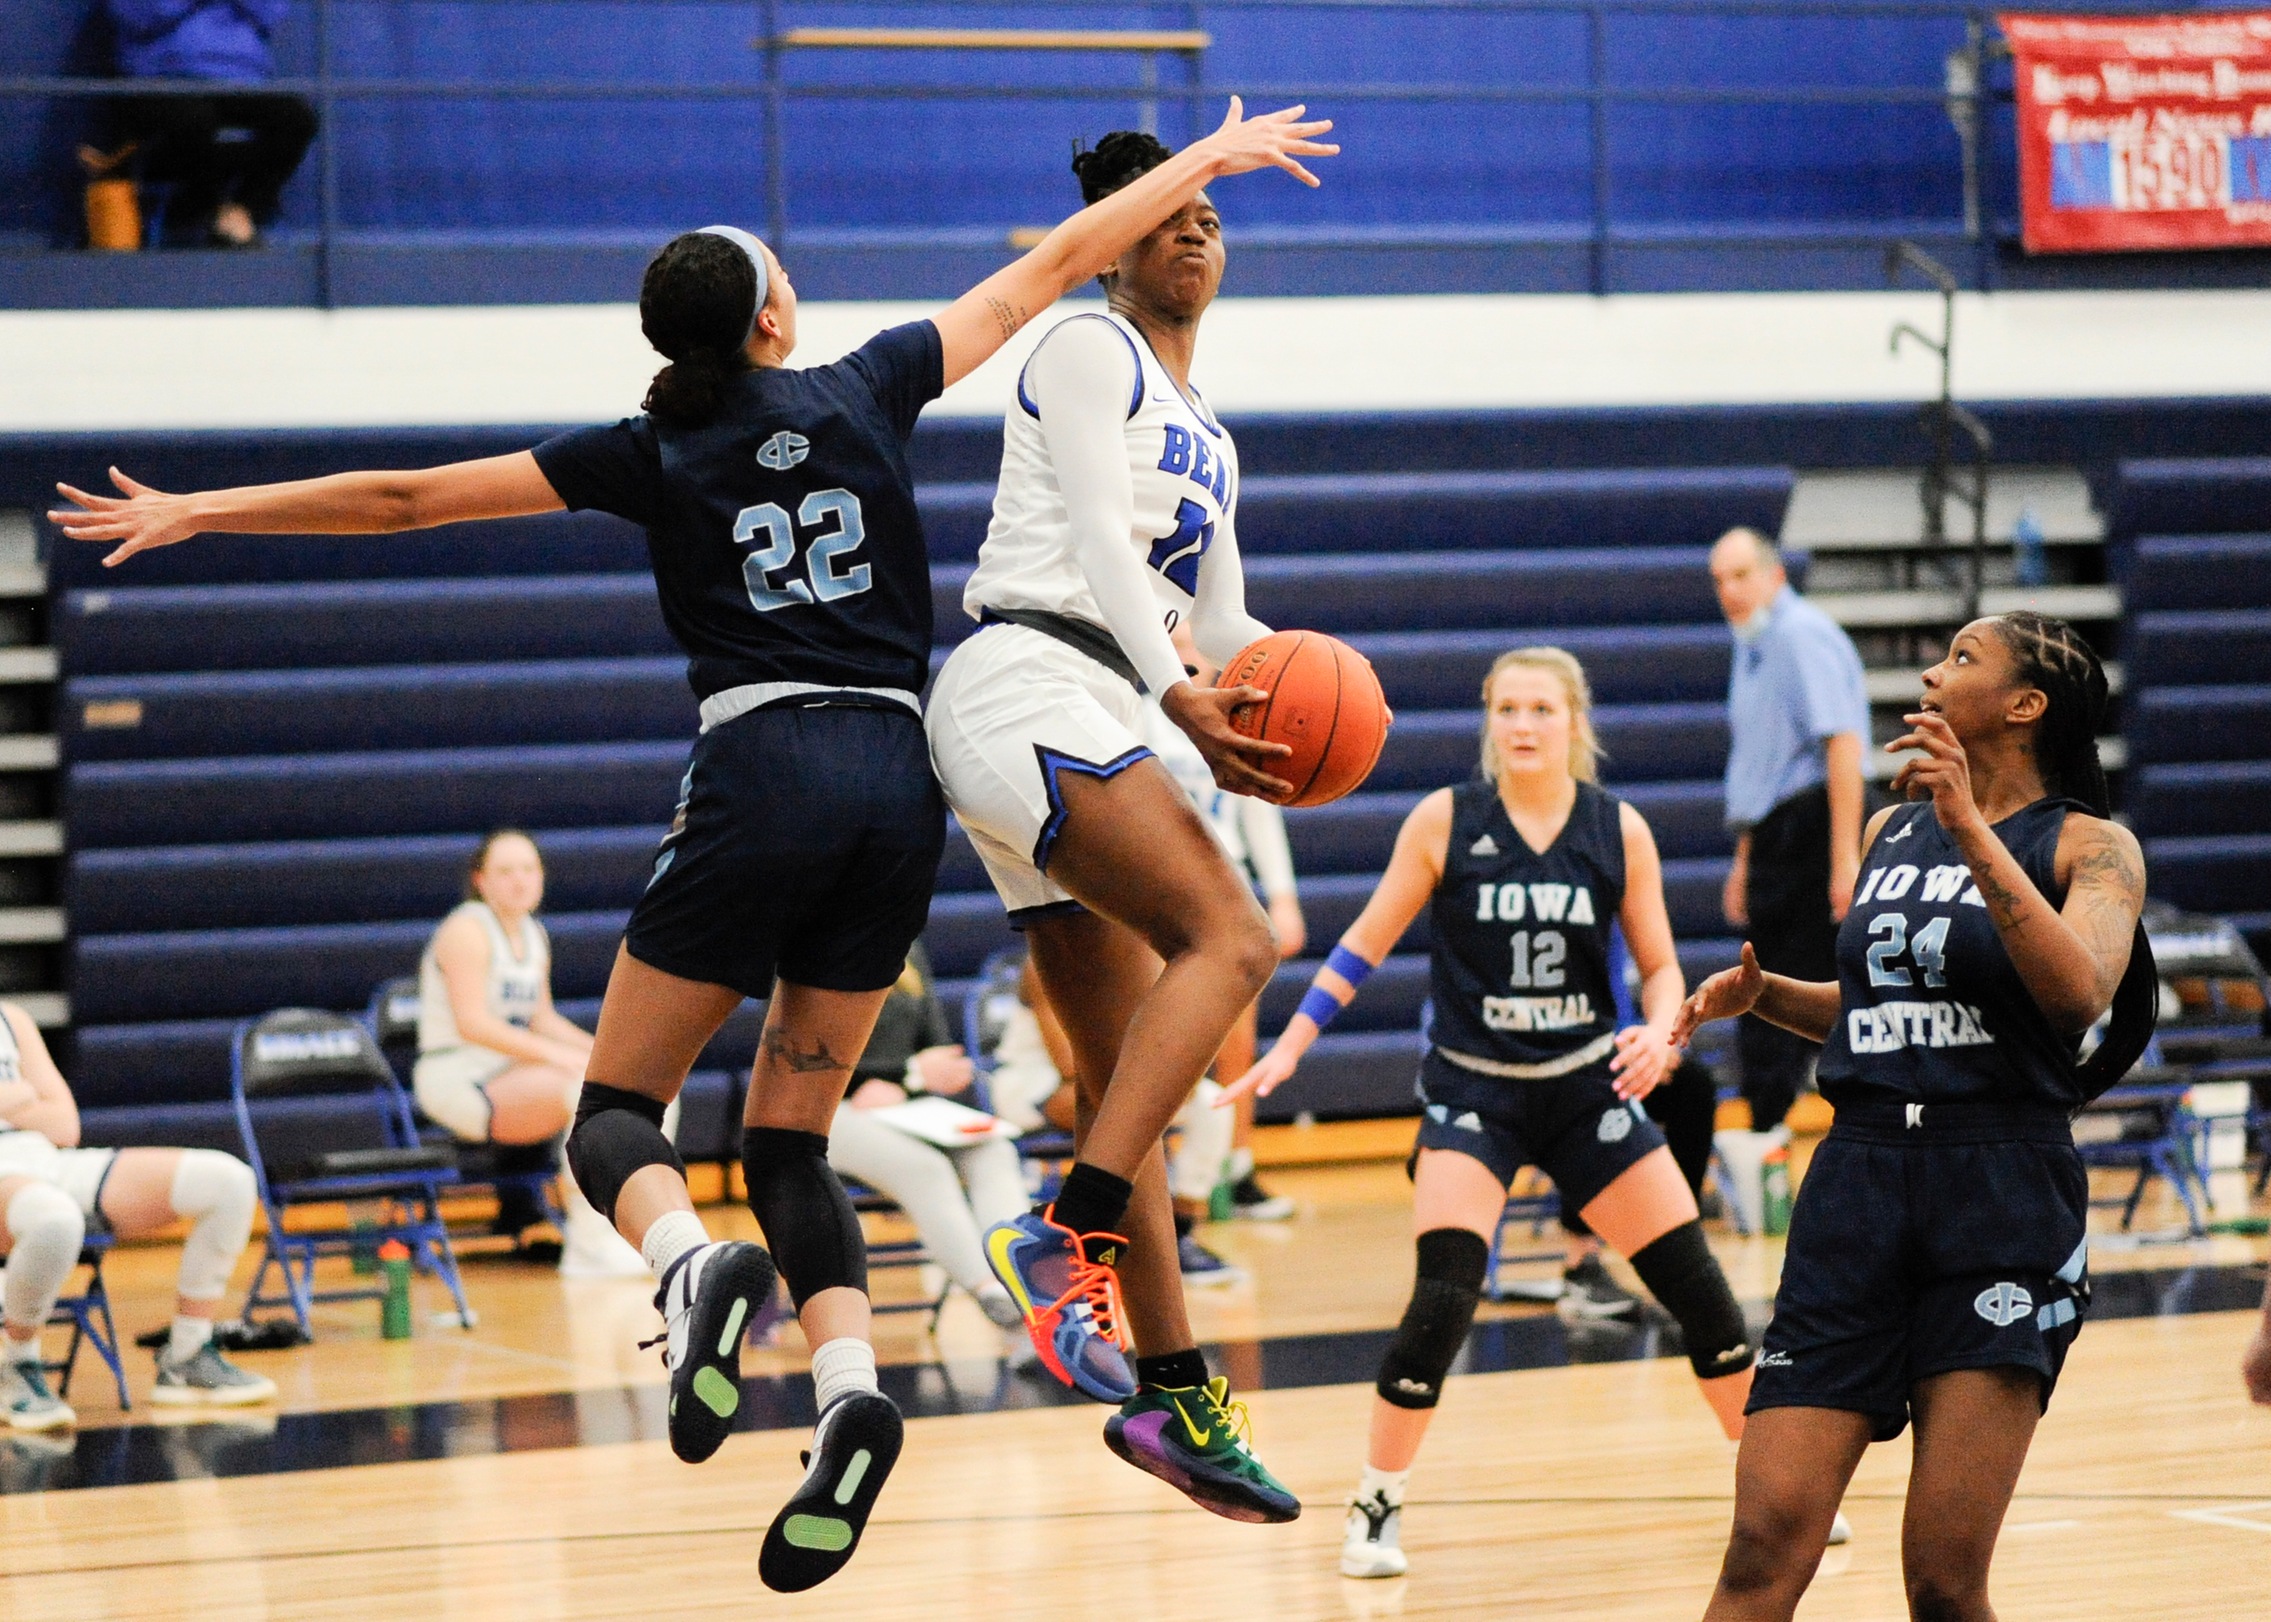 DMACC women's basketball team falls to ICCC in final home game of regular season